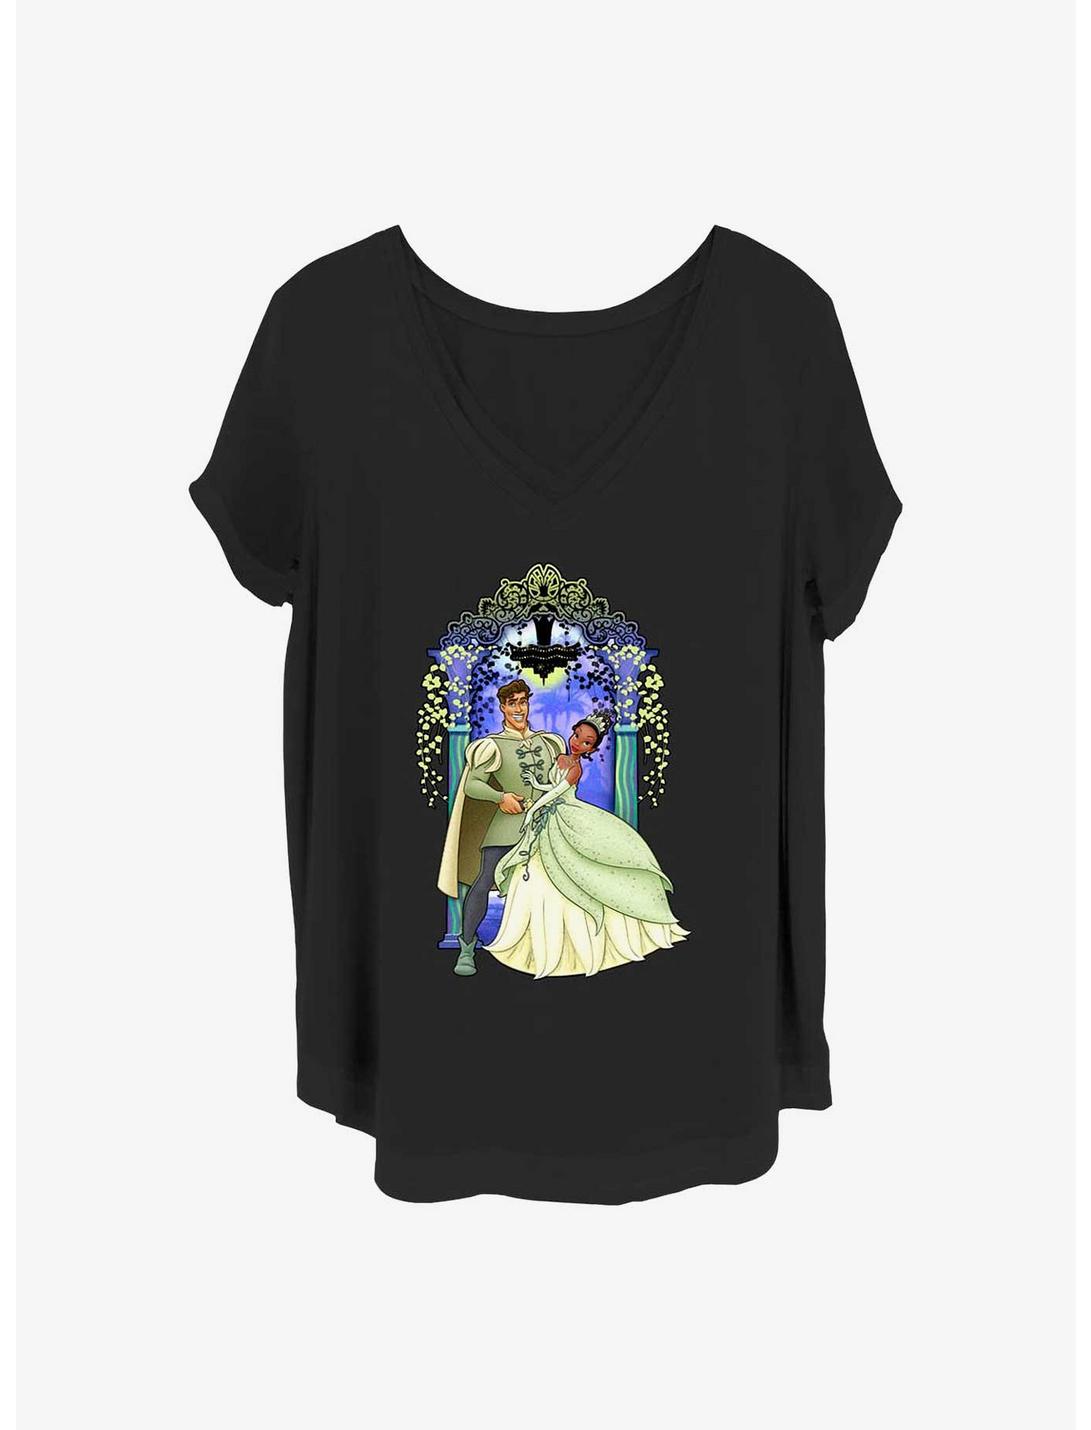 Disney The Princess and the Frog Tiana and Prince Naveen Love Girls T-Shirt Plus Size, BLACK, hi-res